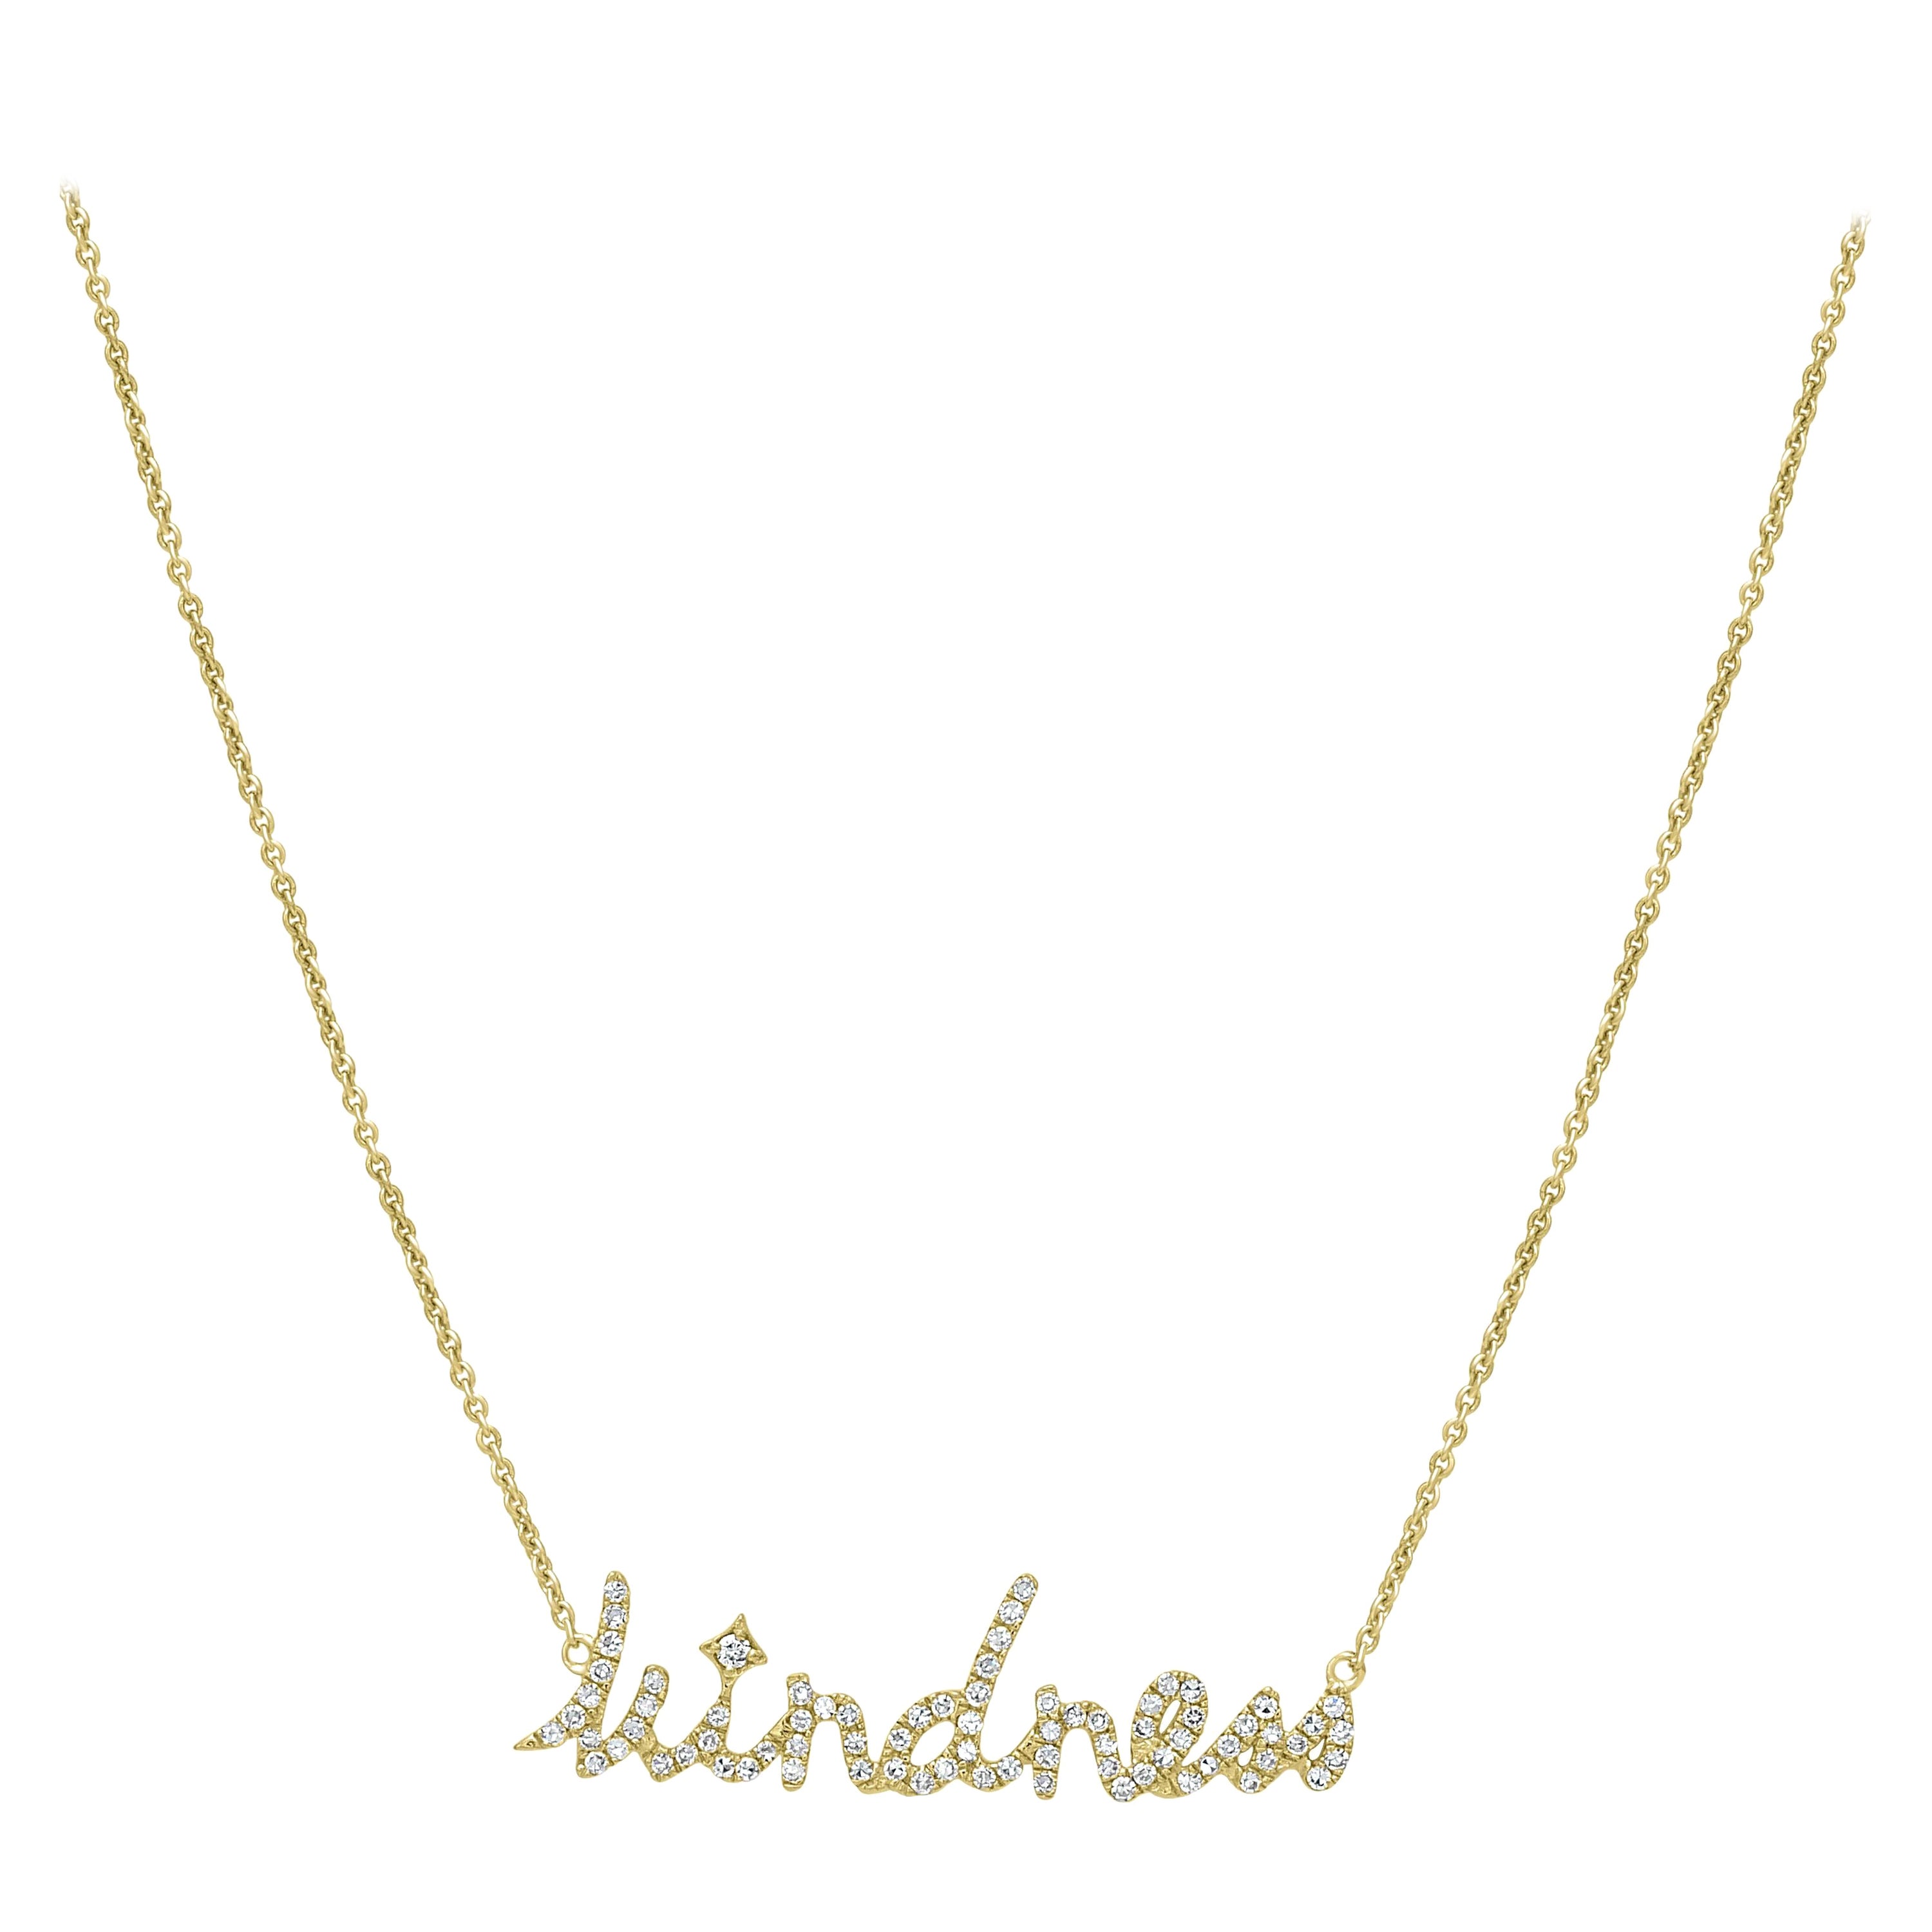 Luxle Kindness Diamond Pendant Necklace in 14k Yellow Gold